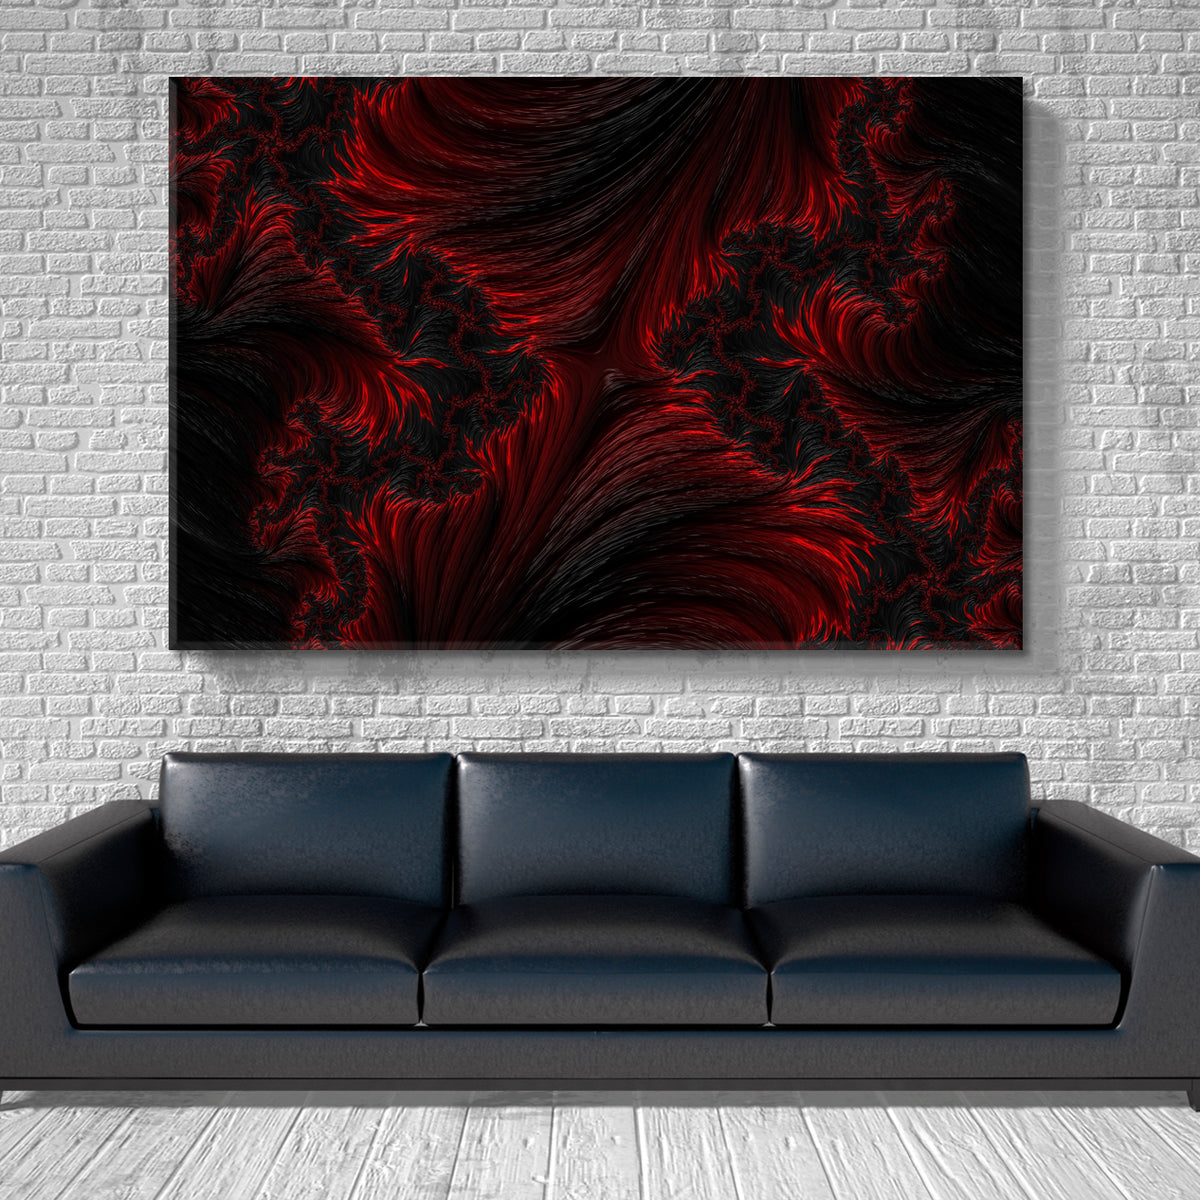 FRACTAL BLACK RED Graphic Design Abstract Creative Pattern Abstract Art Print Artesty 1 panel 24" x 16" 